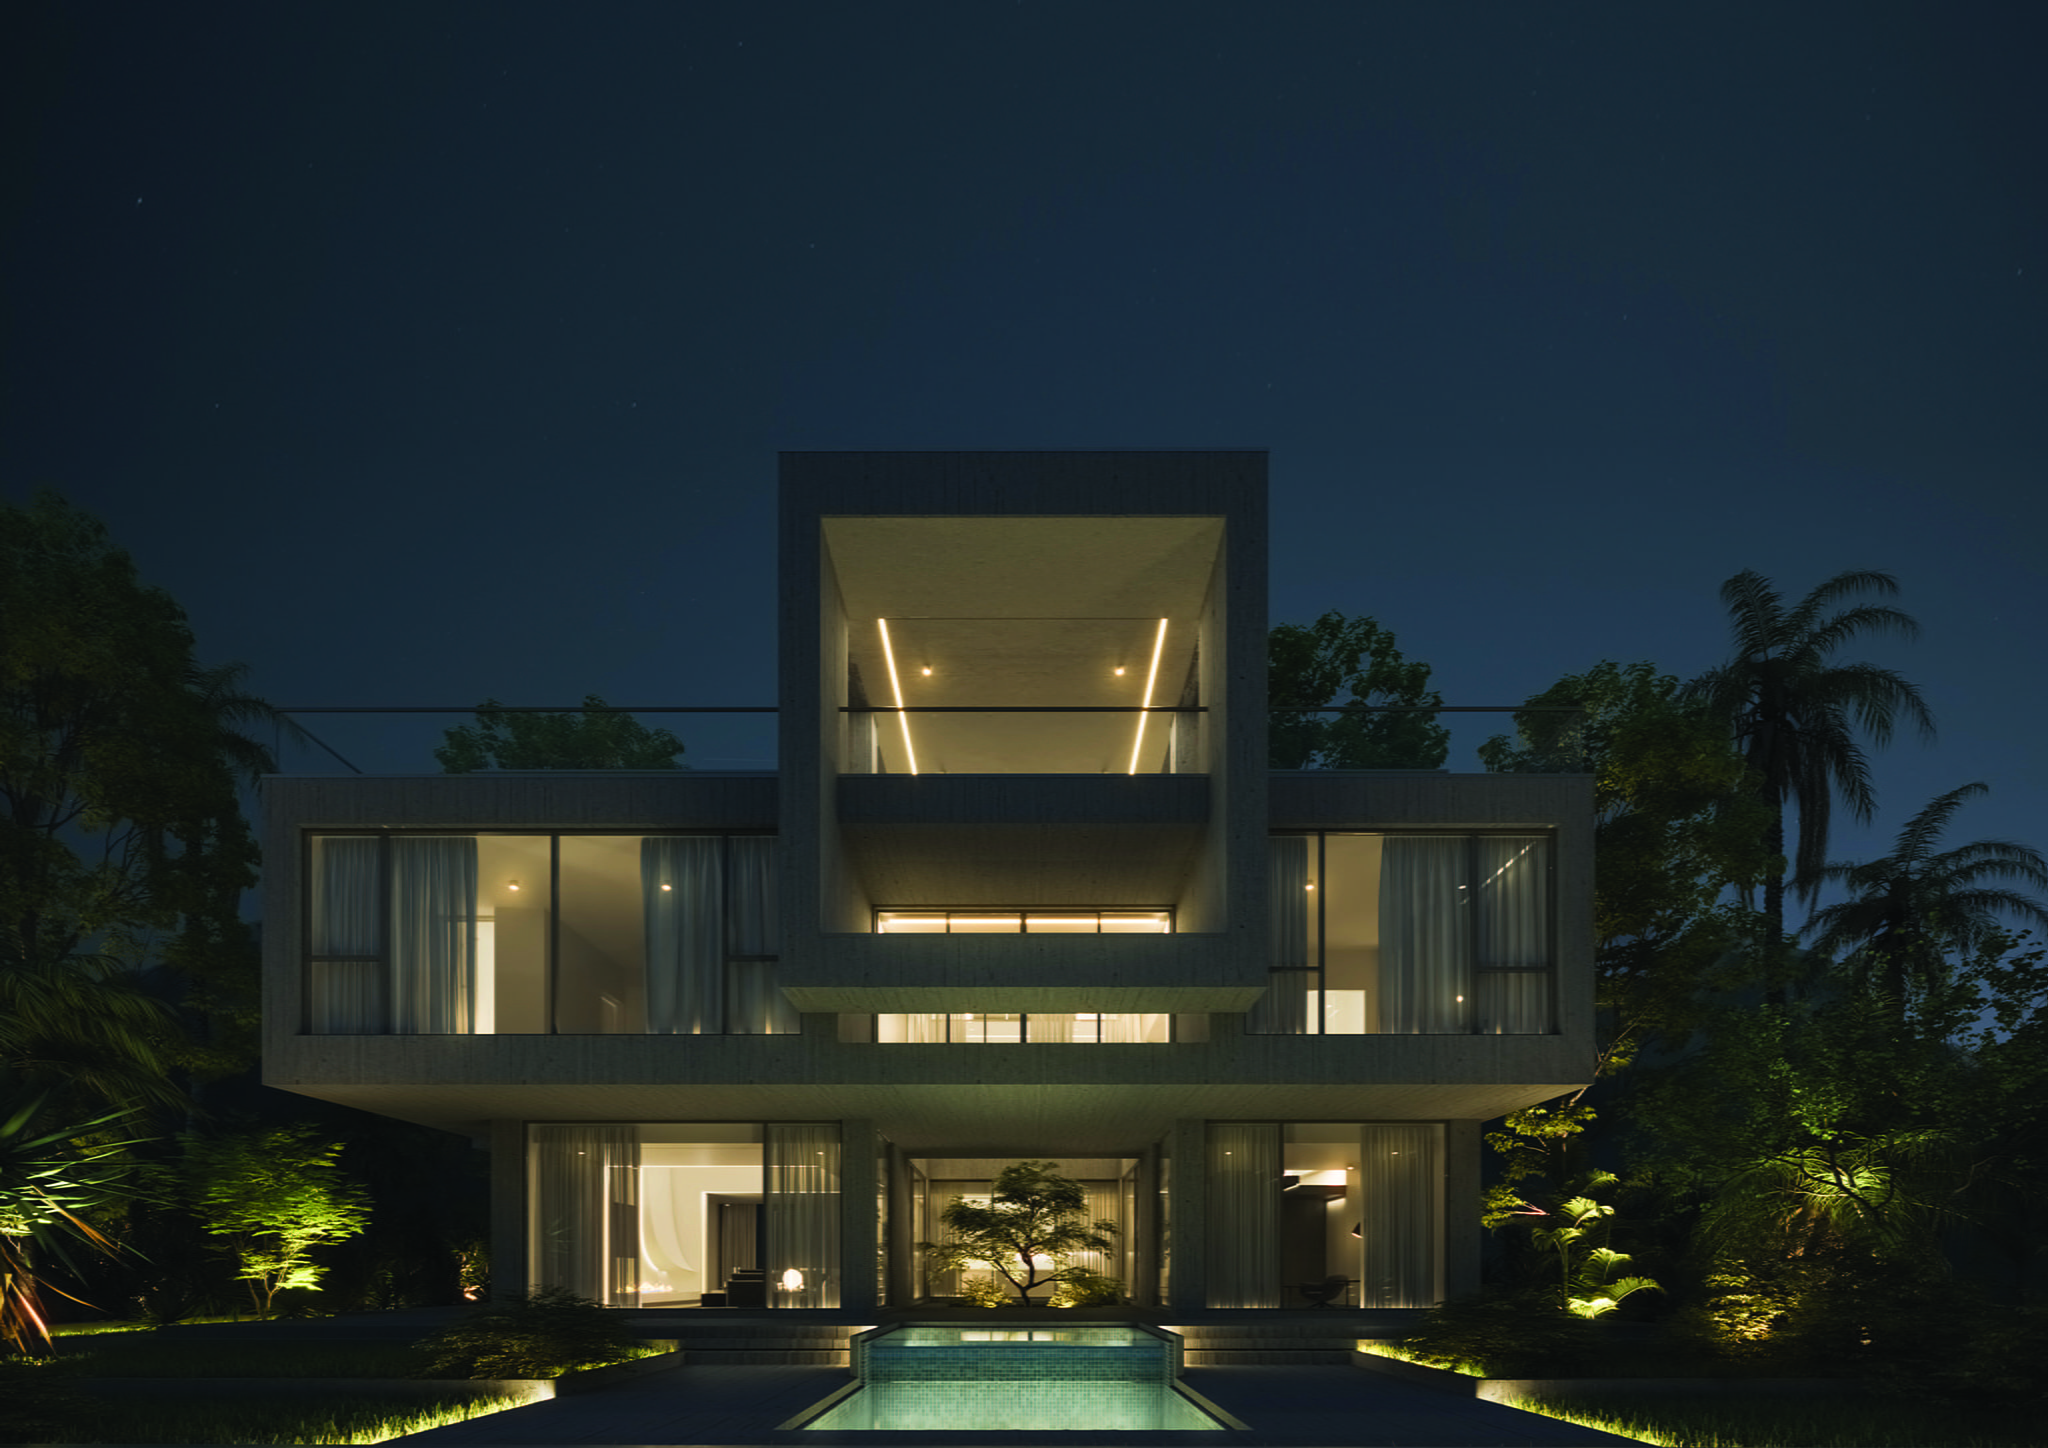 Exterior perspective rendering of a modern 2+ storey concrete house; night mode frontal backyard view.